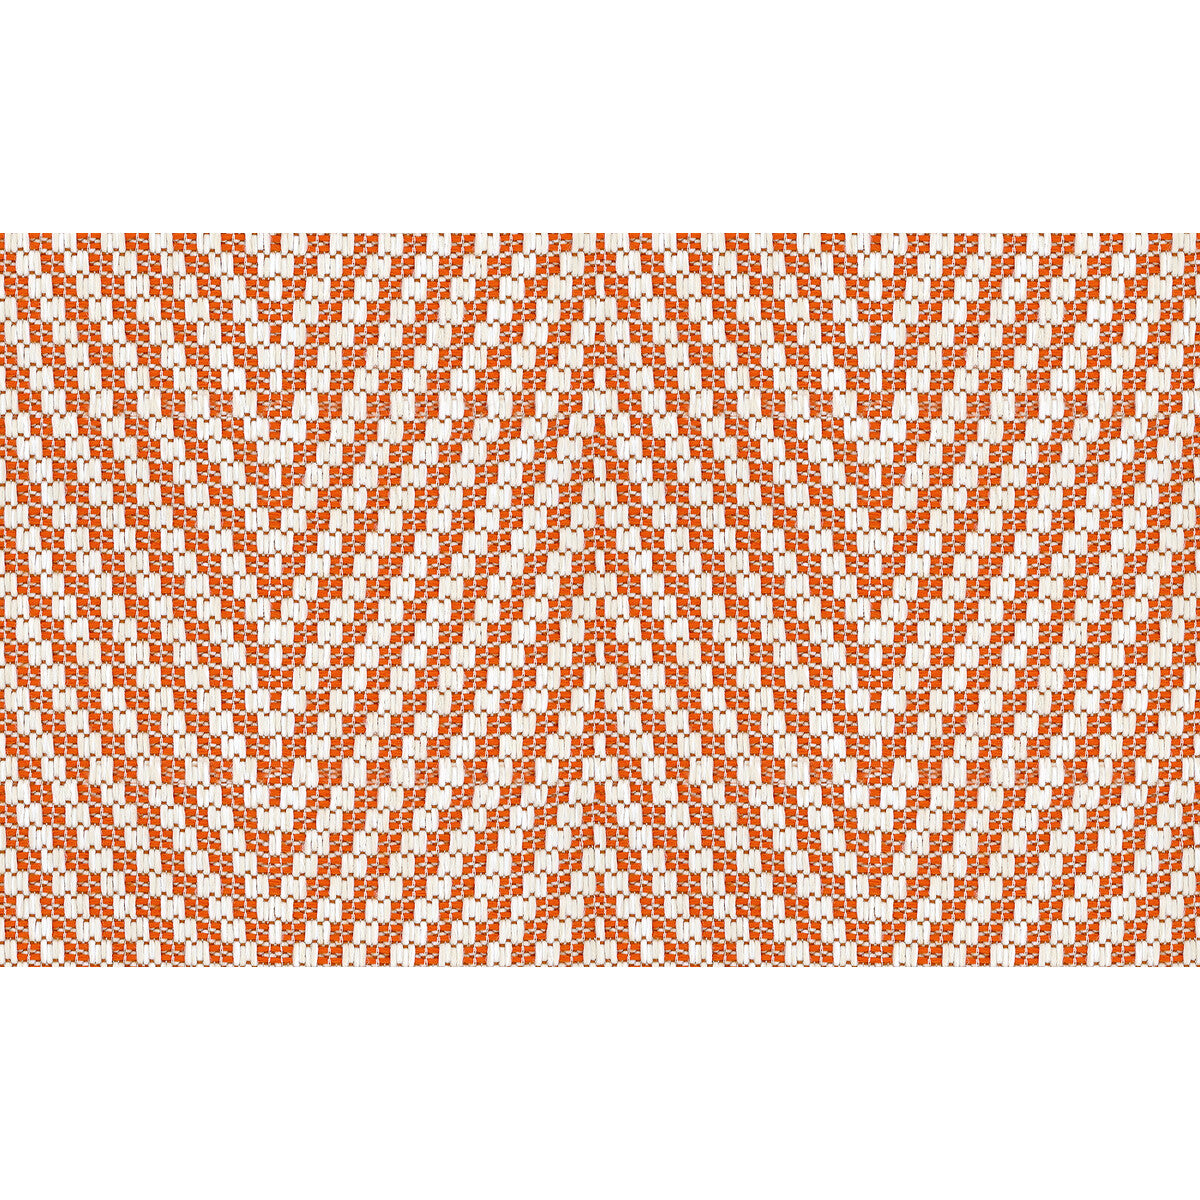 Kali Chevron fabric in tangelo color - pattern 33495.12.0 - by Kravet Design in the Echo Indoor Outdoor Ibiza collection